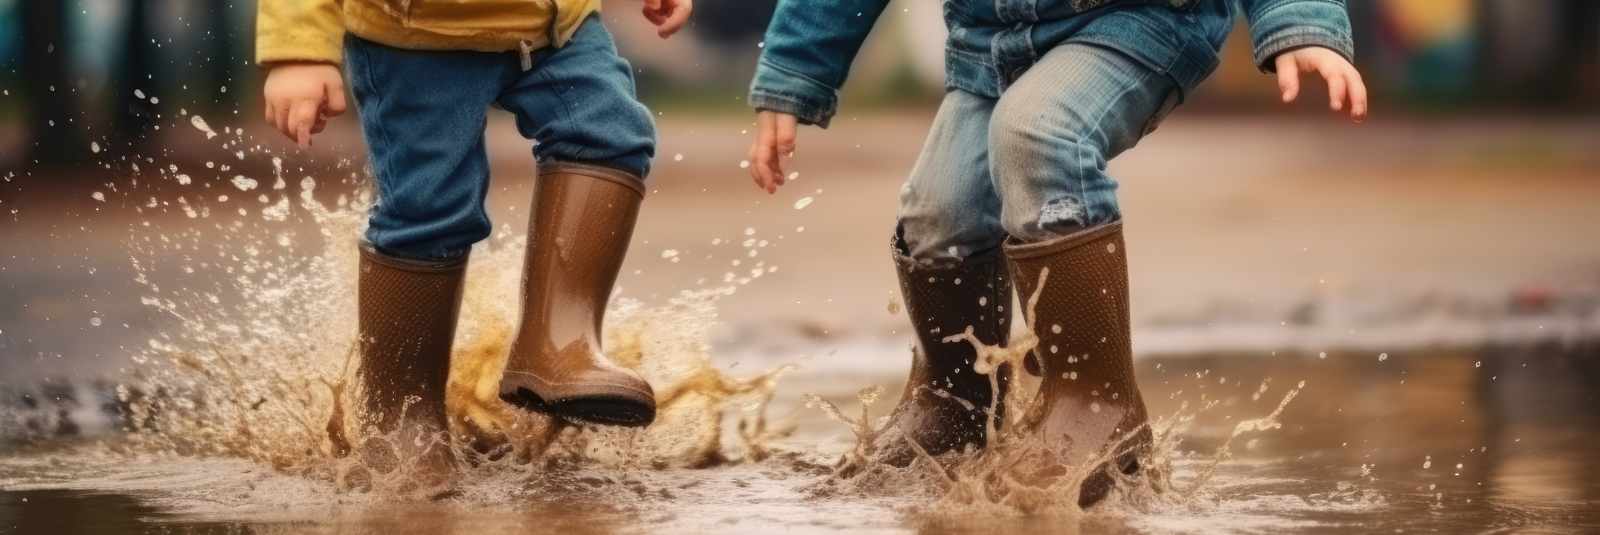 two kids jumping in puddle